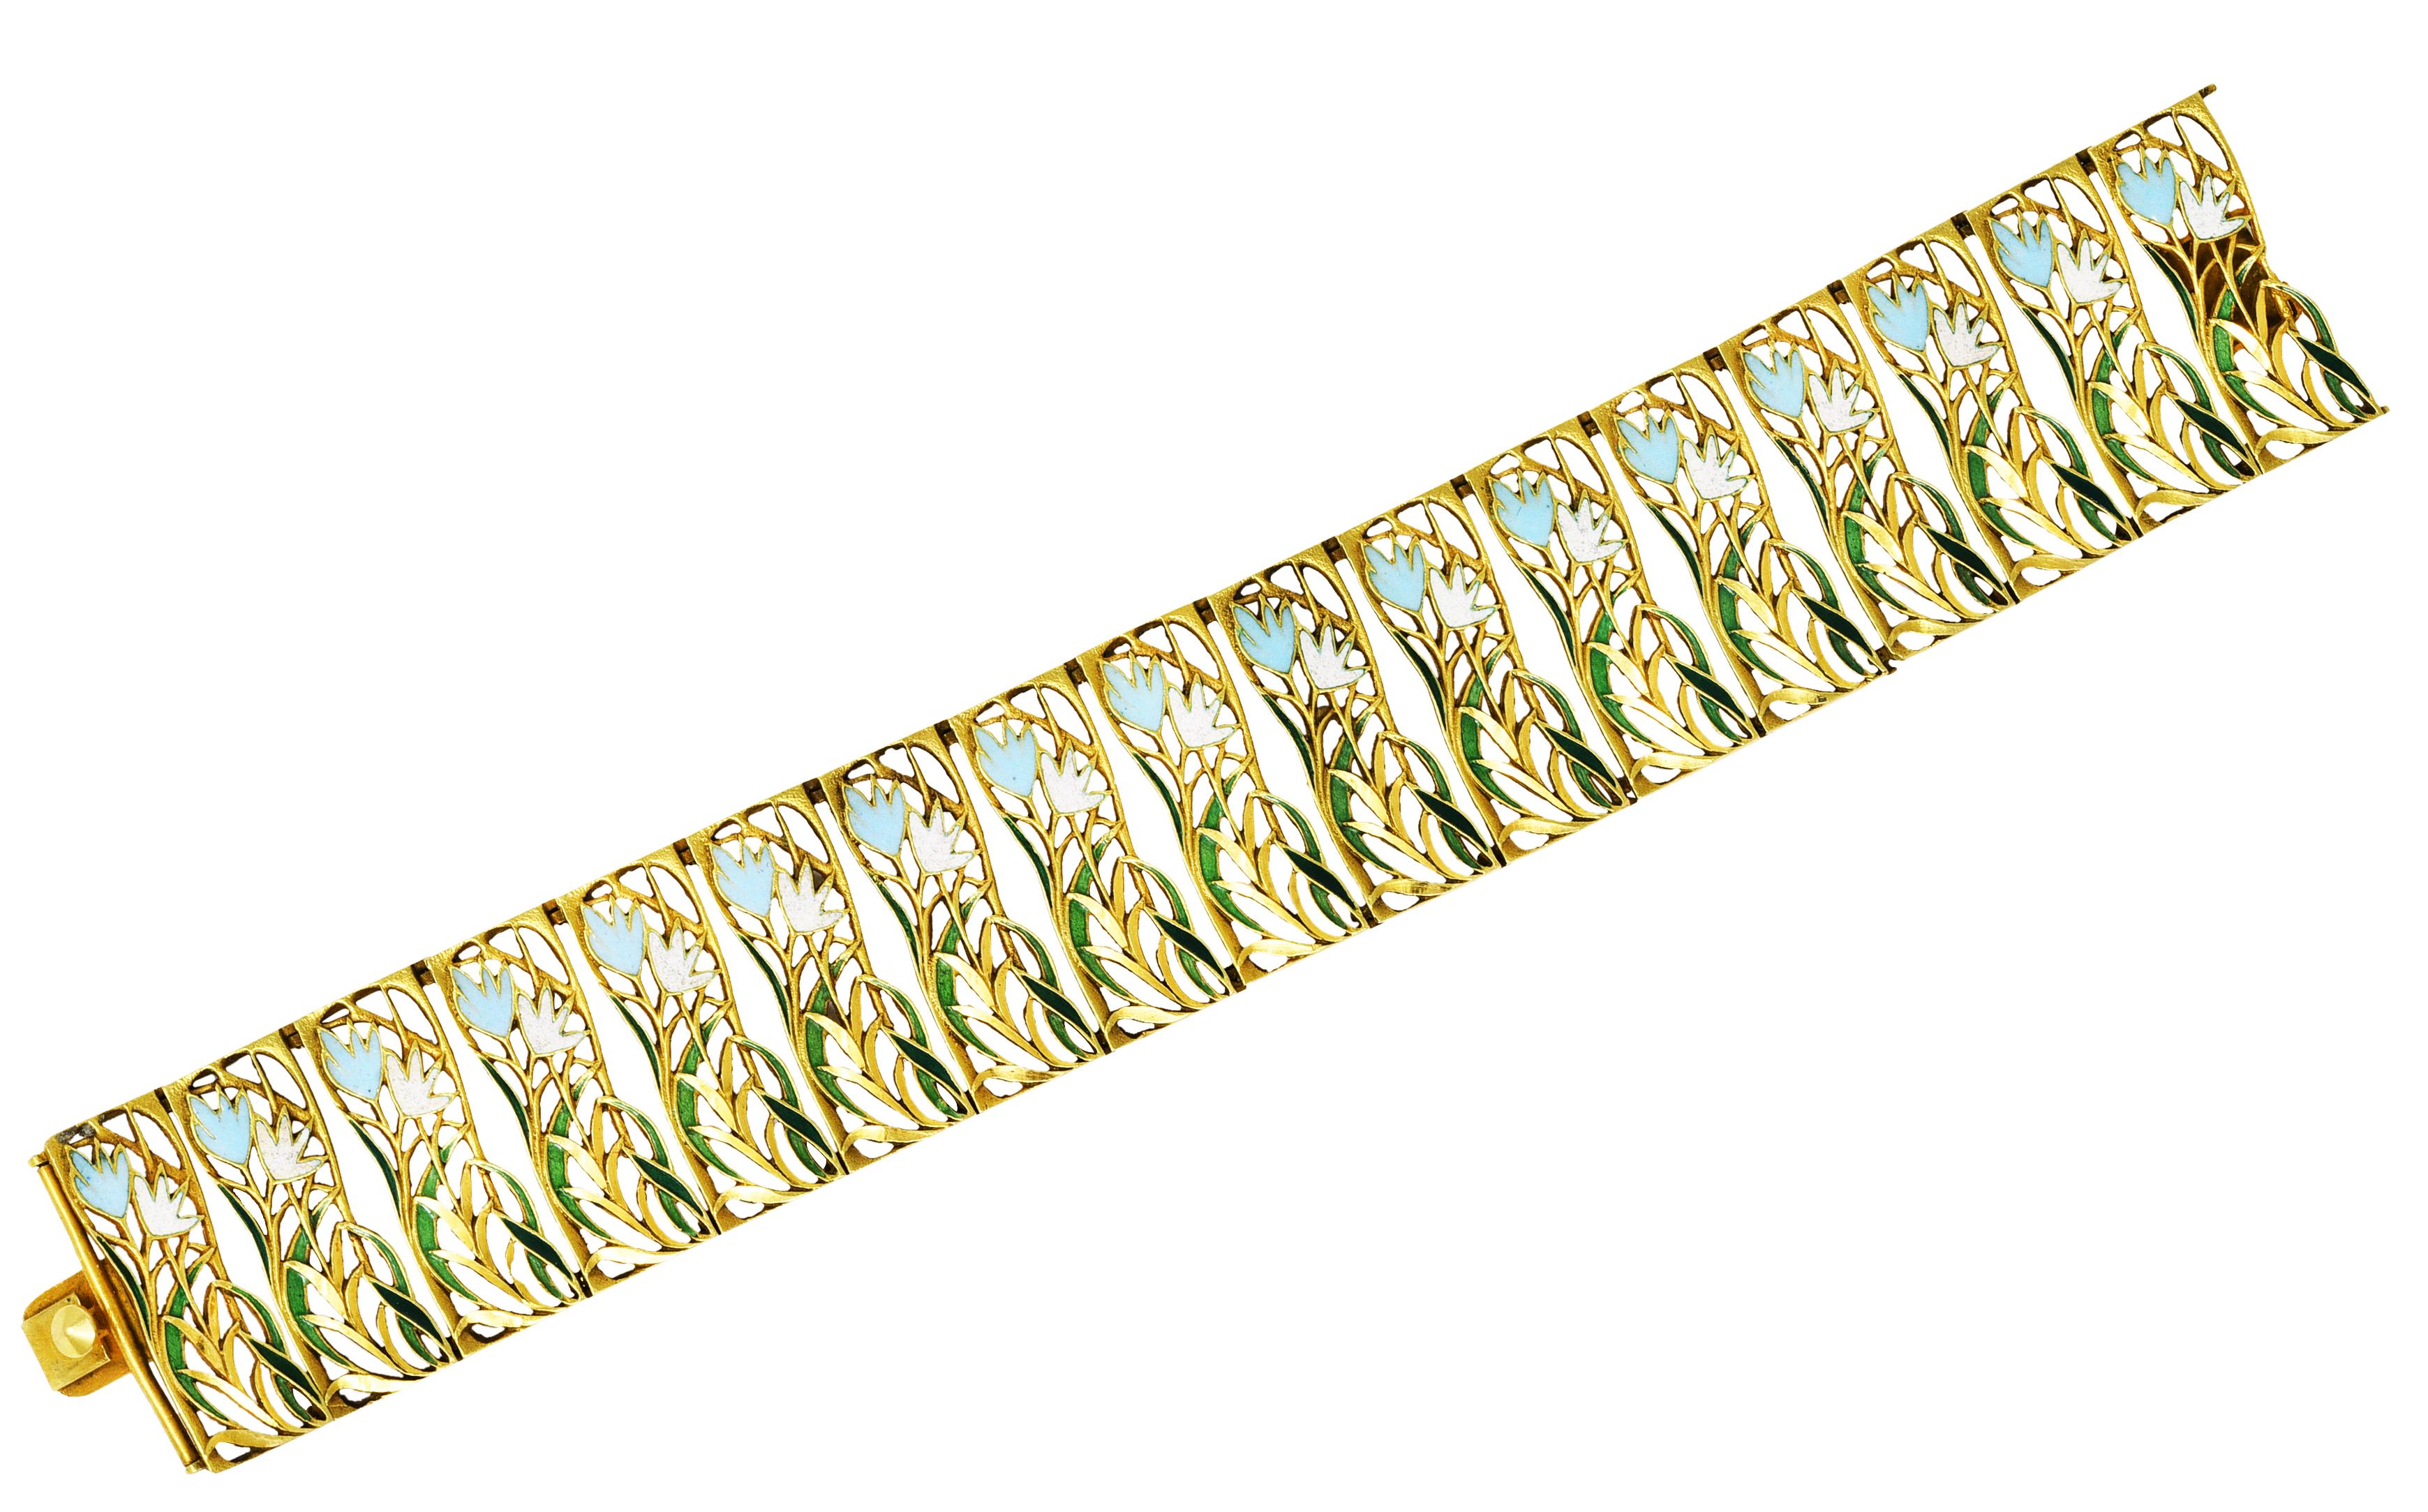 Bracelet is comprised of pierced gold panel links with flowing enamel floral motif throughout

Glossed opaque blue, opaque pink, and transparent green in color - quality consistent with age

Completed by hidden clasp

Stamped 750 and k18 for 18